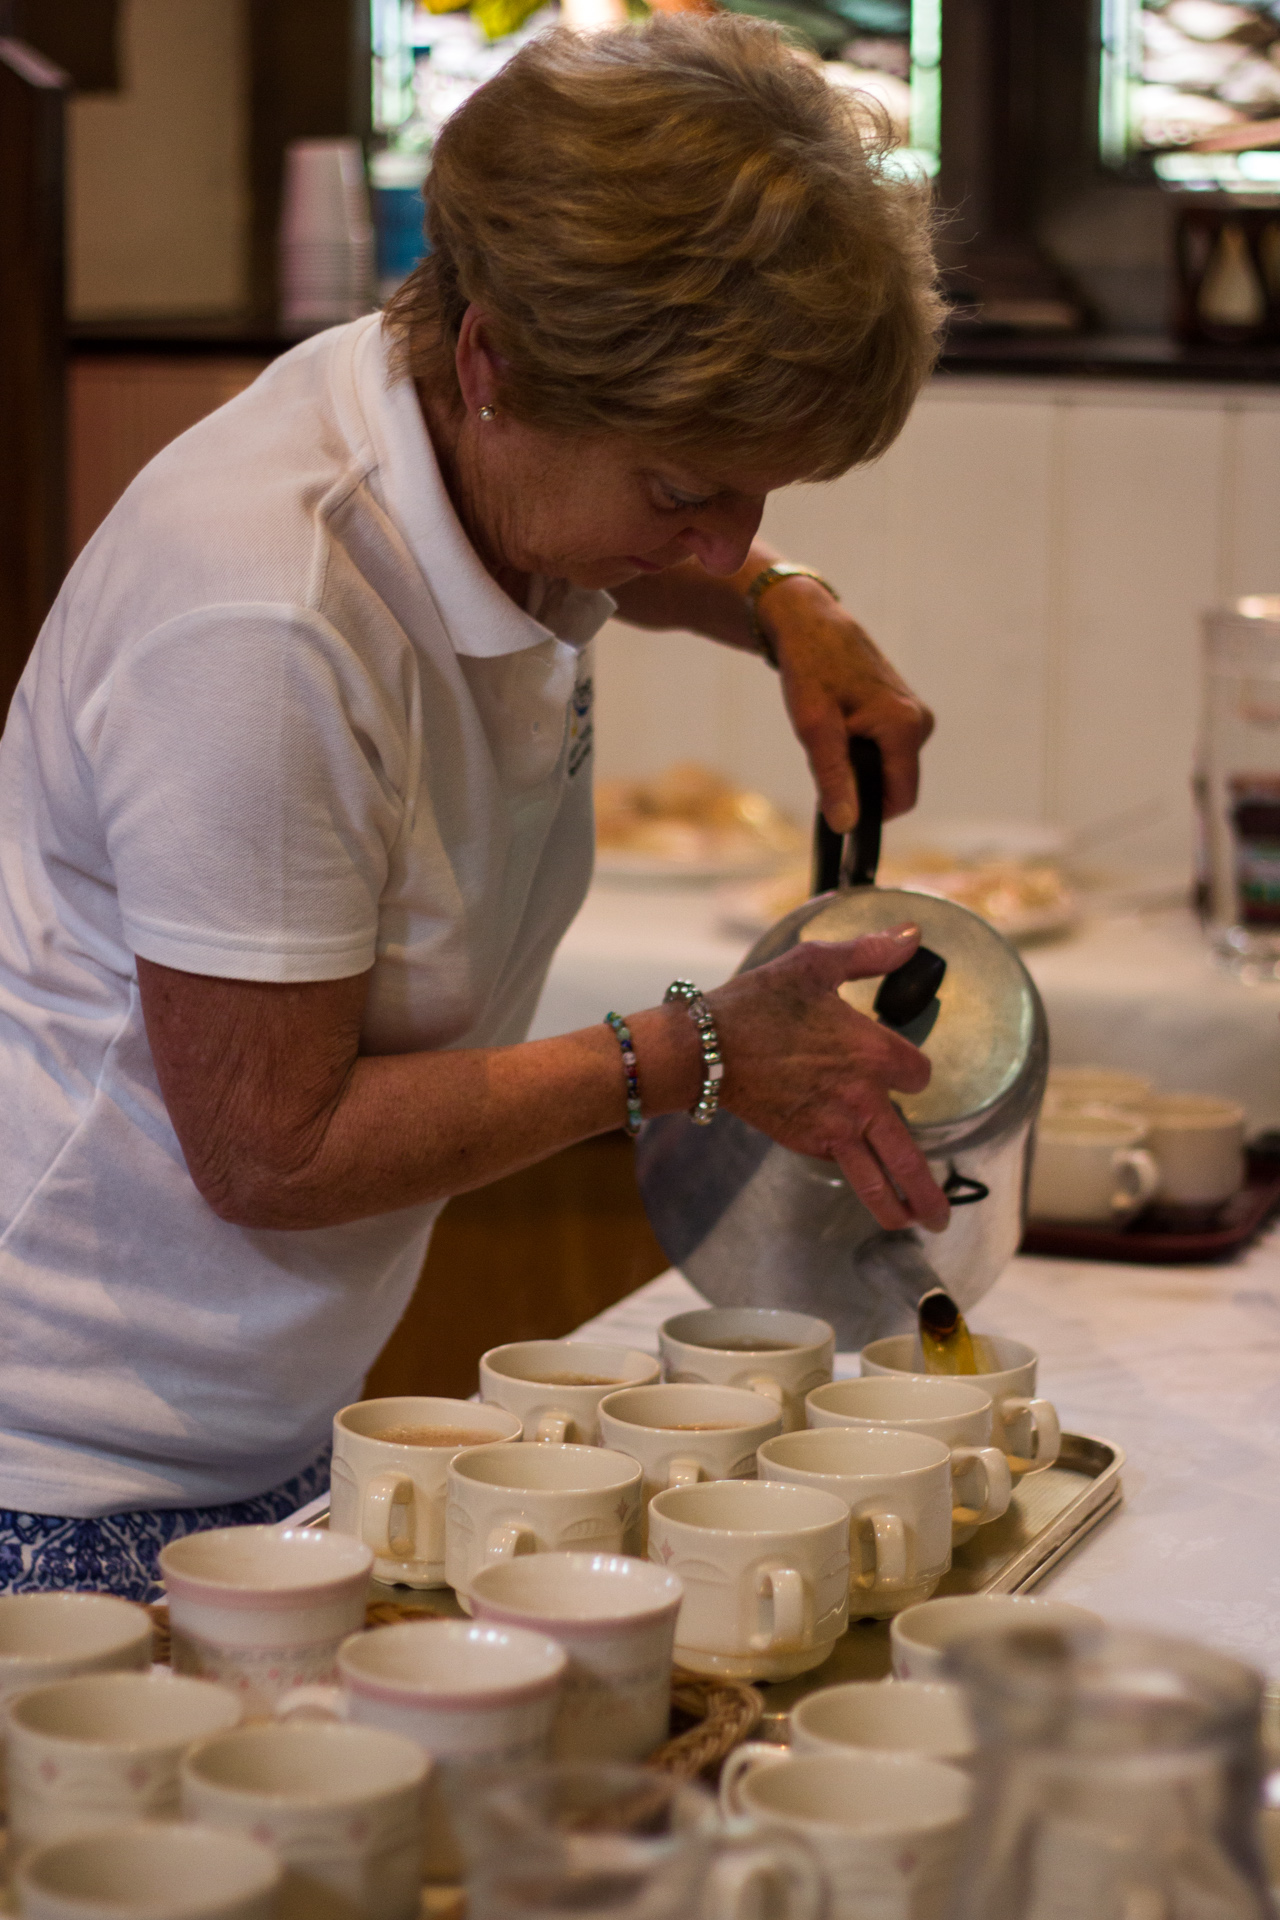 Doing a sterling job, Sally Somerville poured tea for audience-members to enjoy.